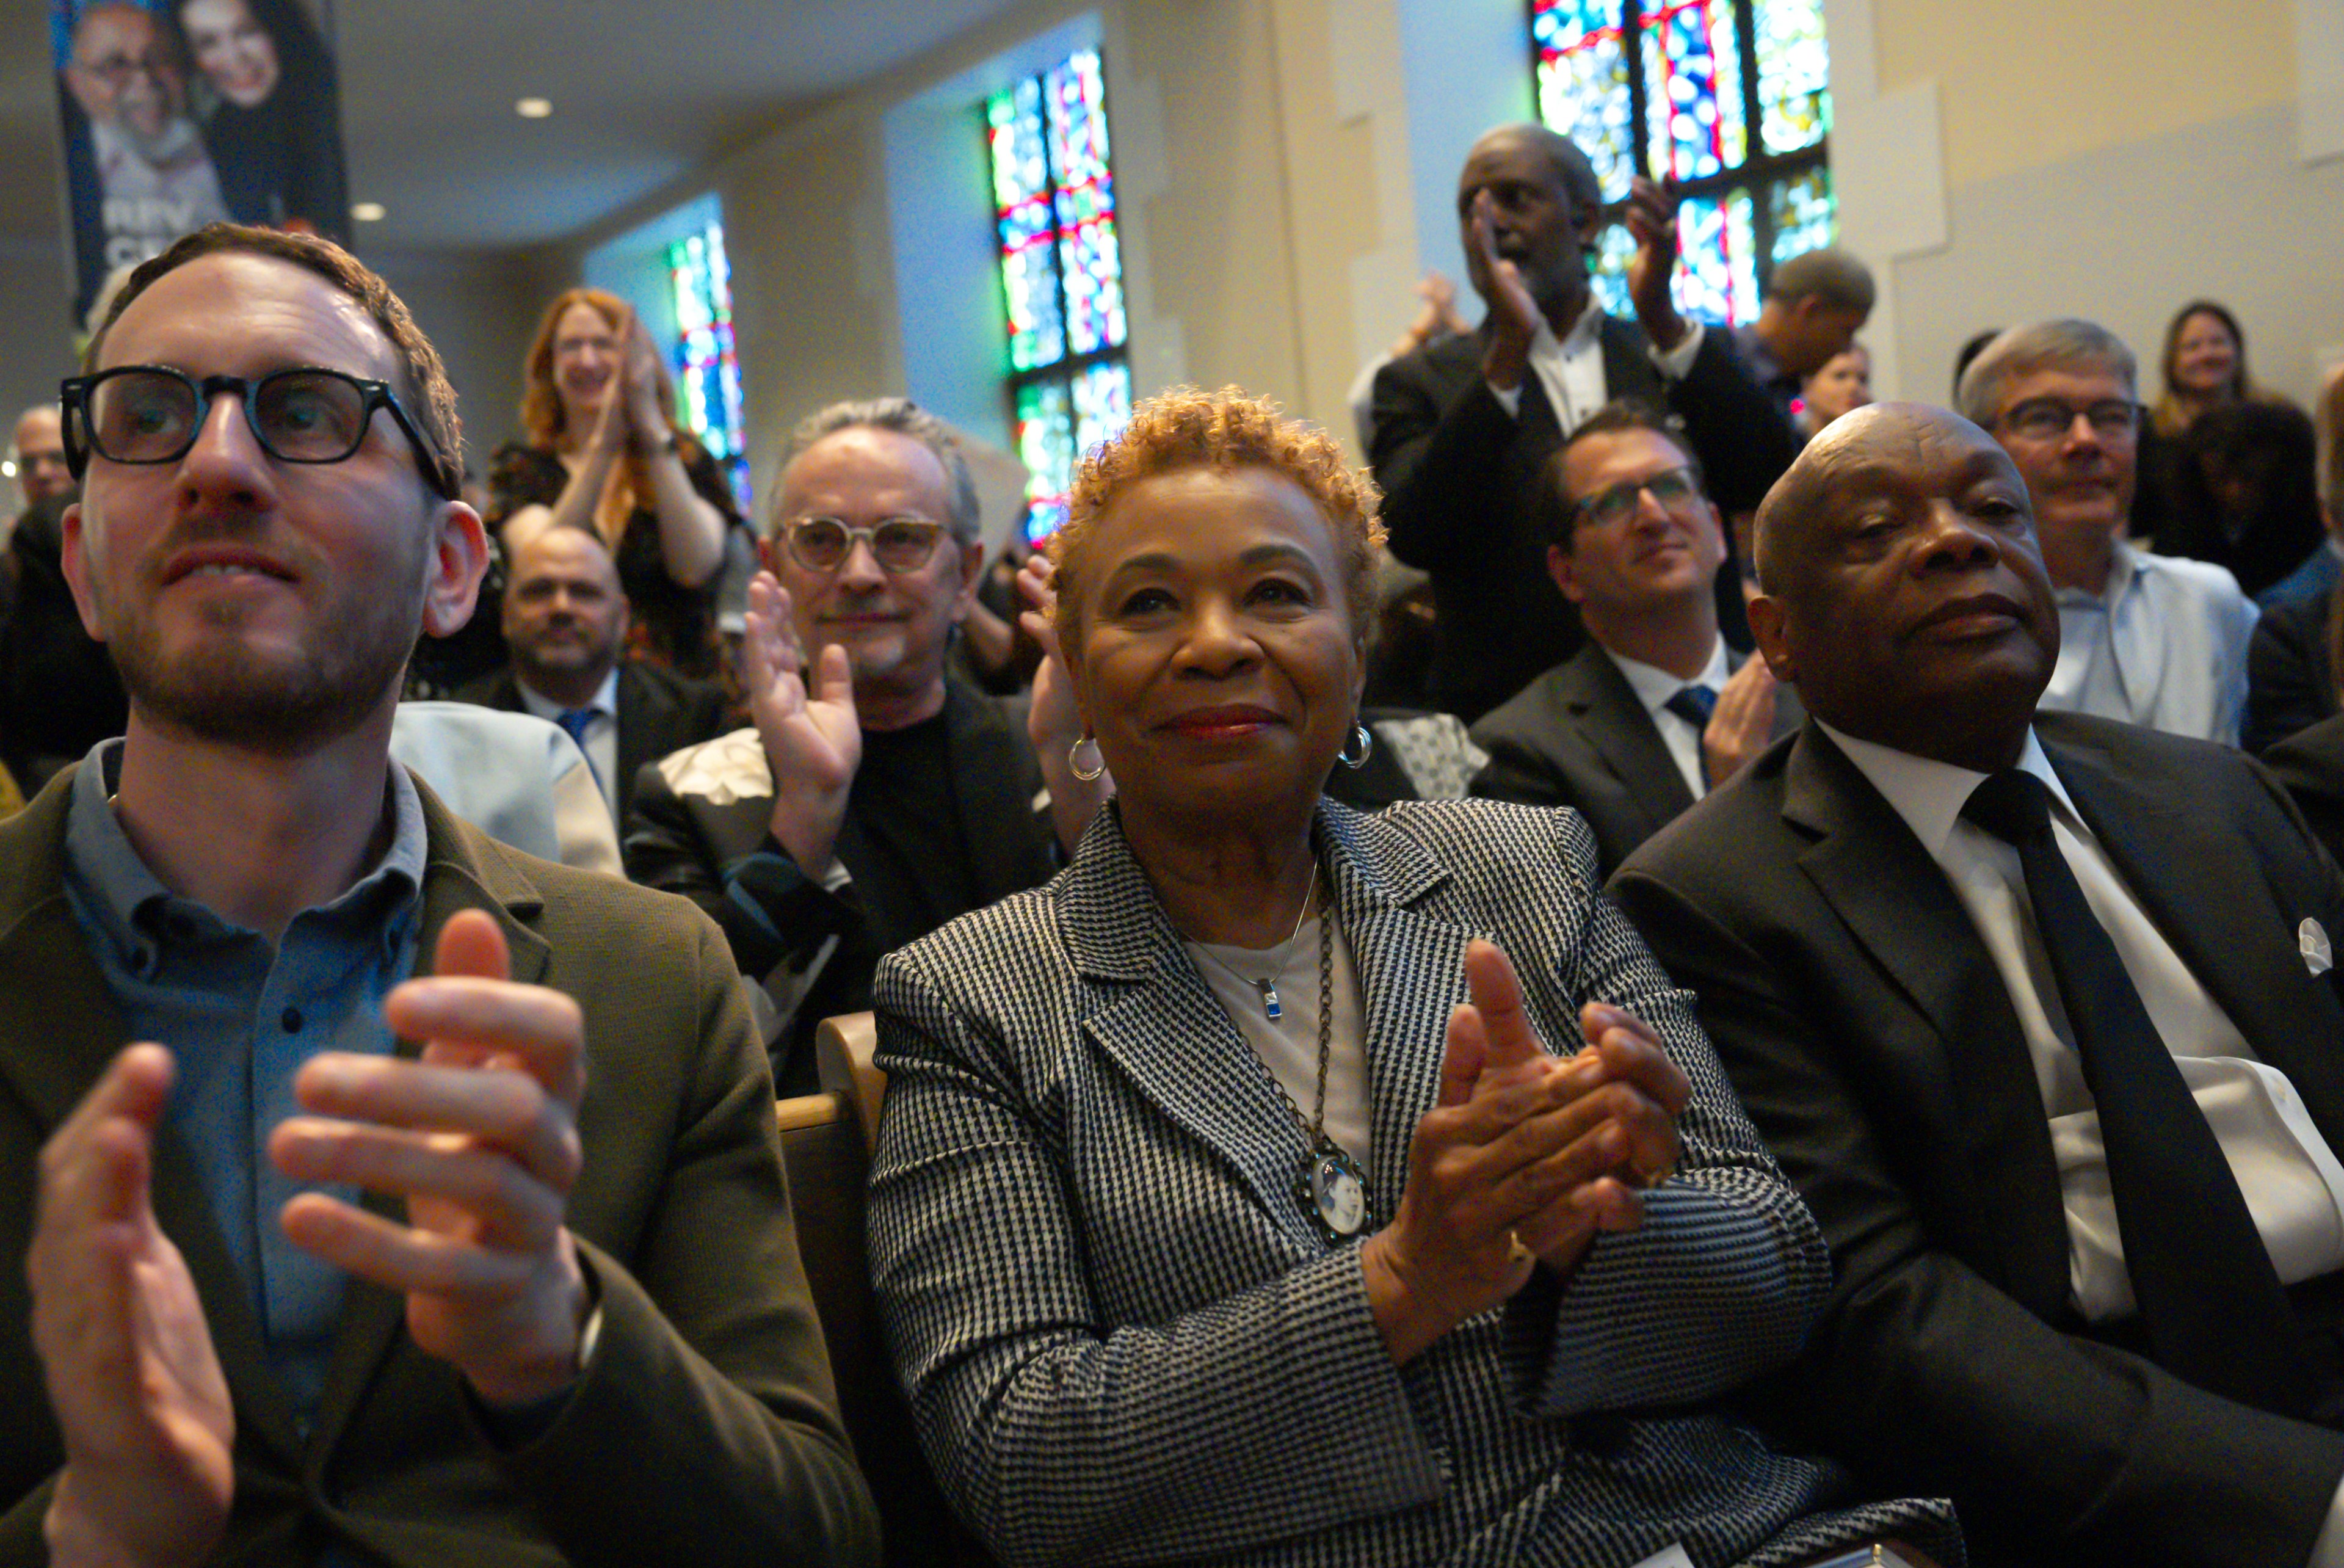 A diverse crowd clapping indoors, some smiling, with stained glass windows in the background.